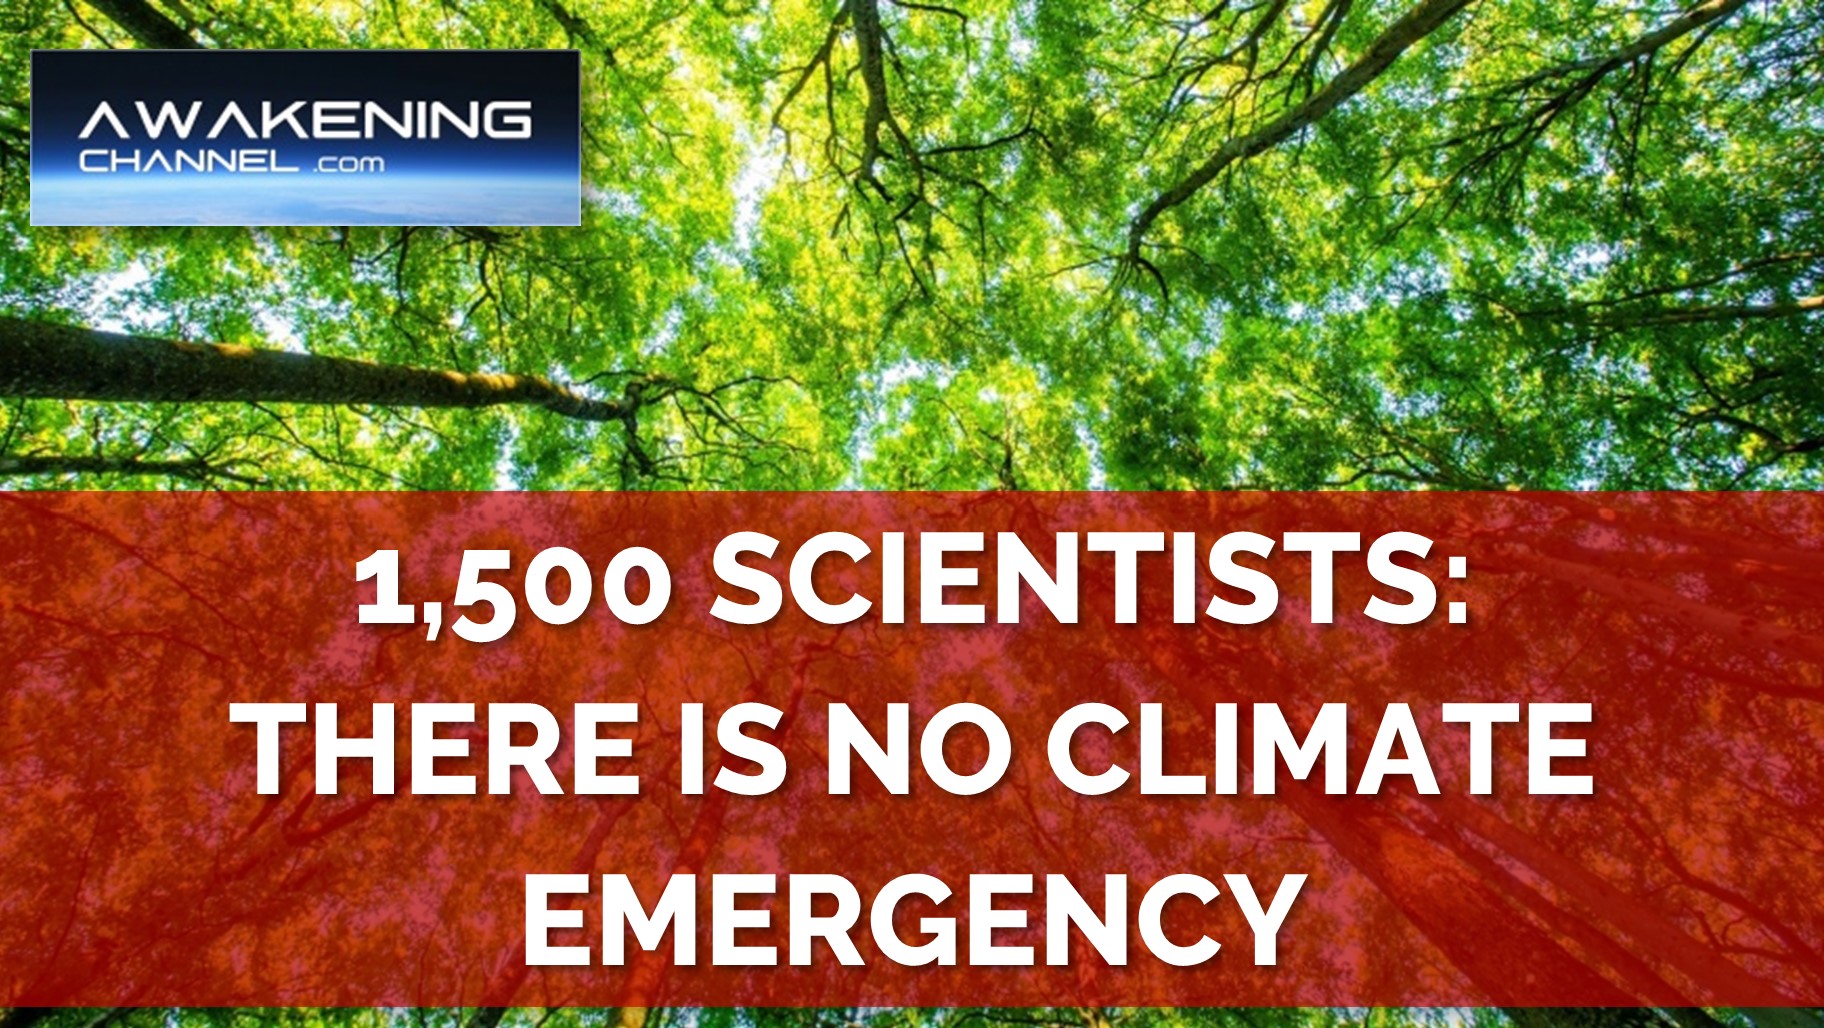 Urgent Message From 1,500 Scientists And Professionals:  THERE IS NO CLIMATE EMERGENCY